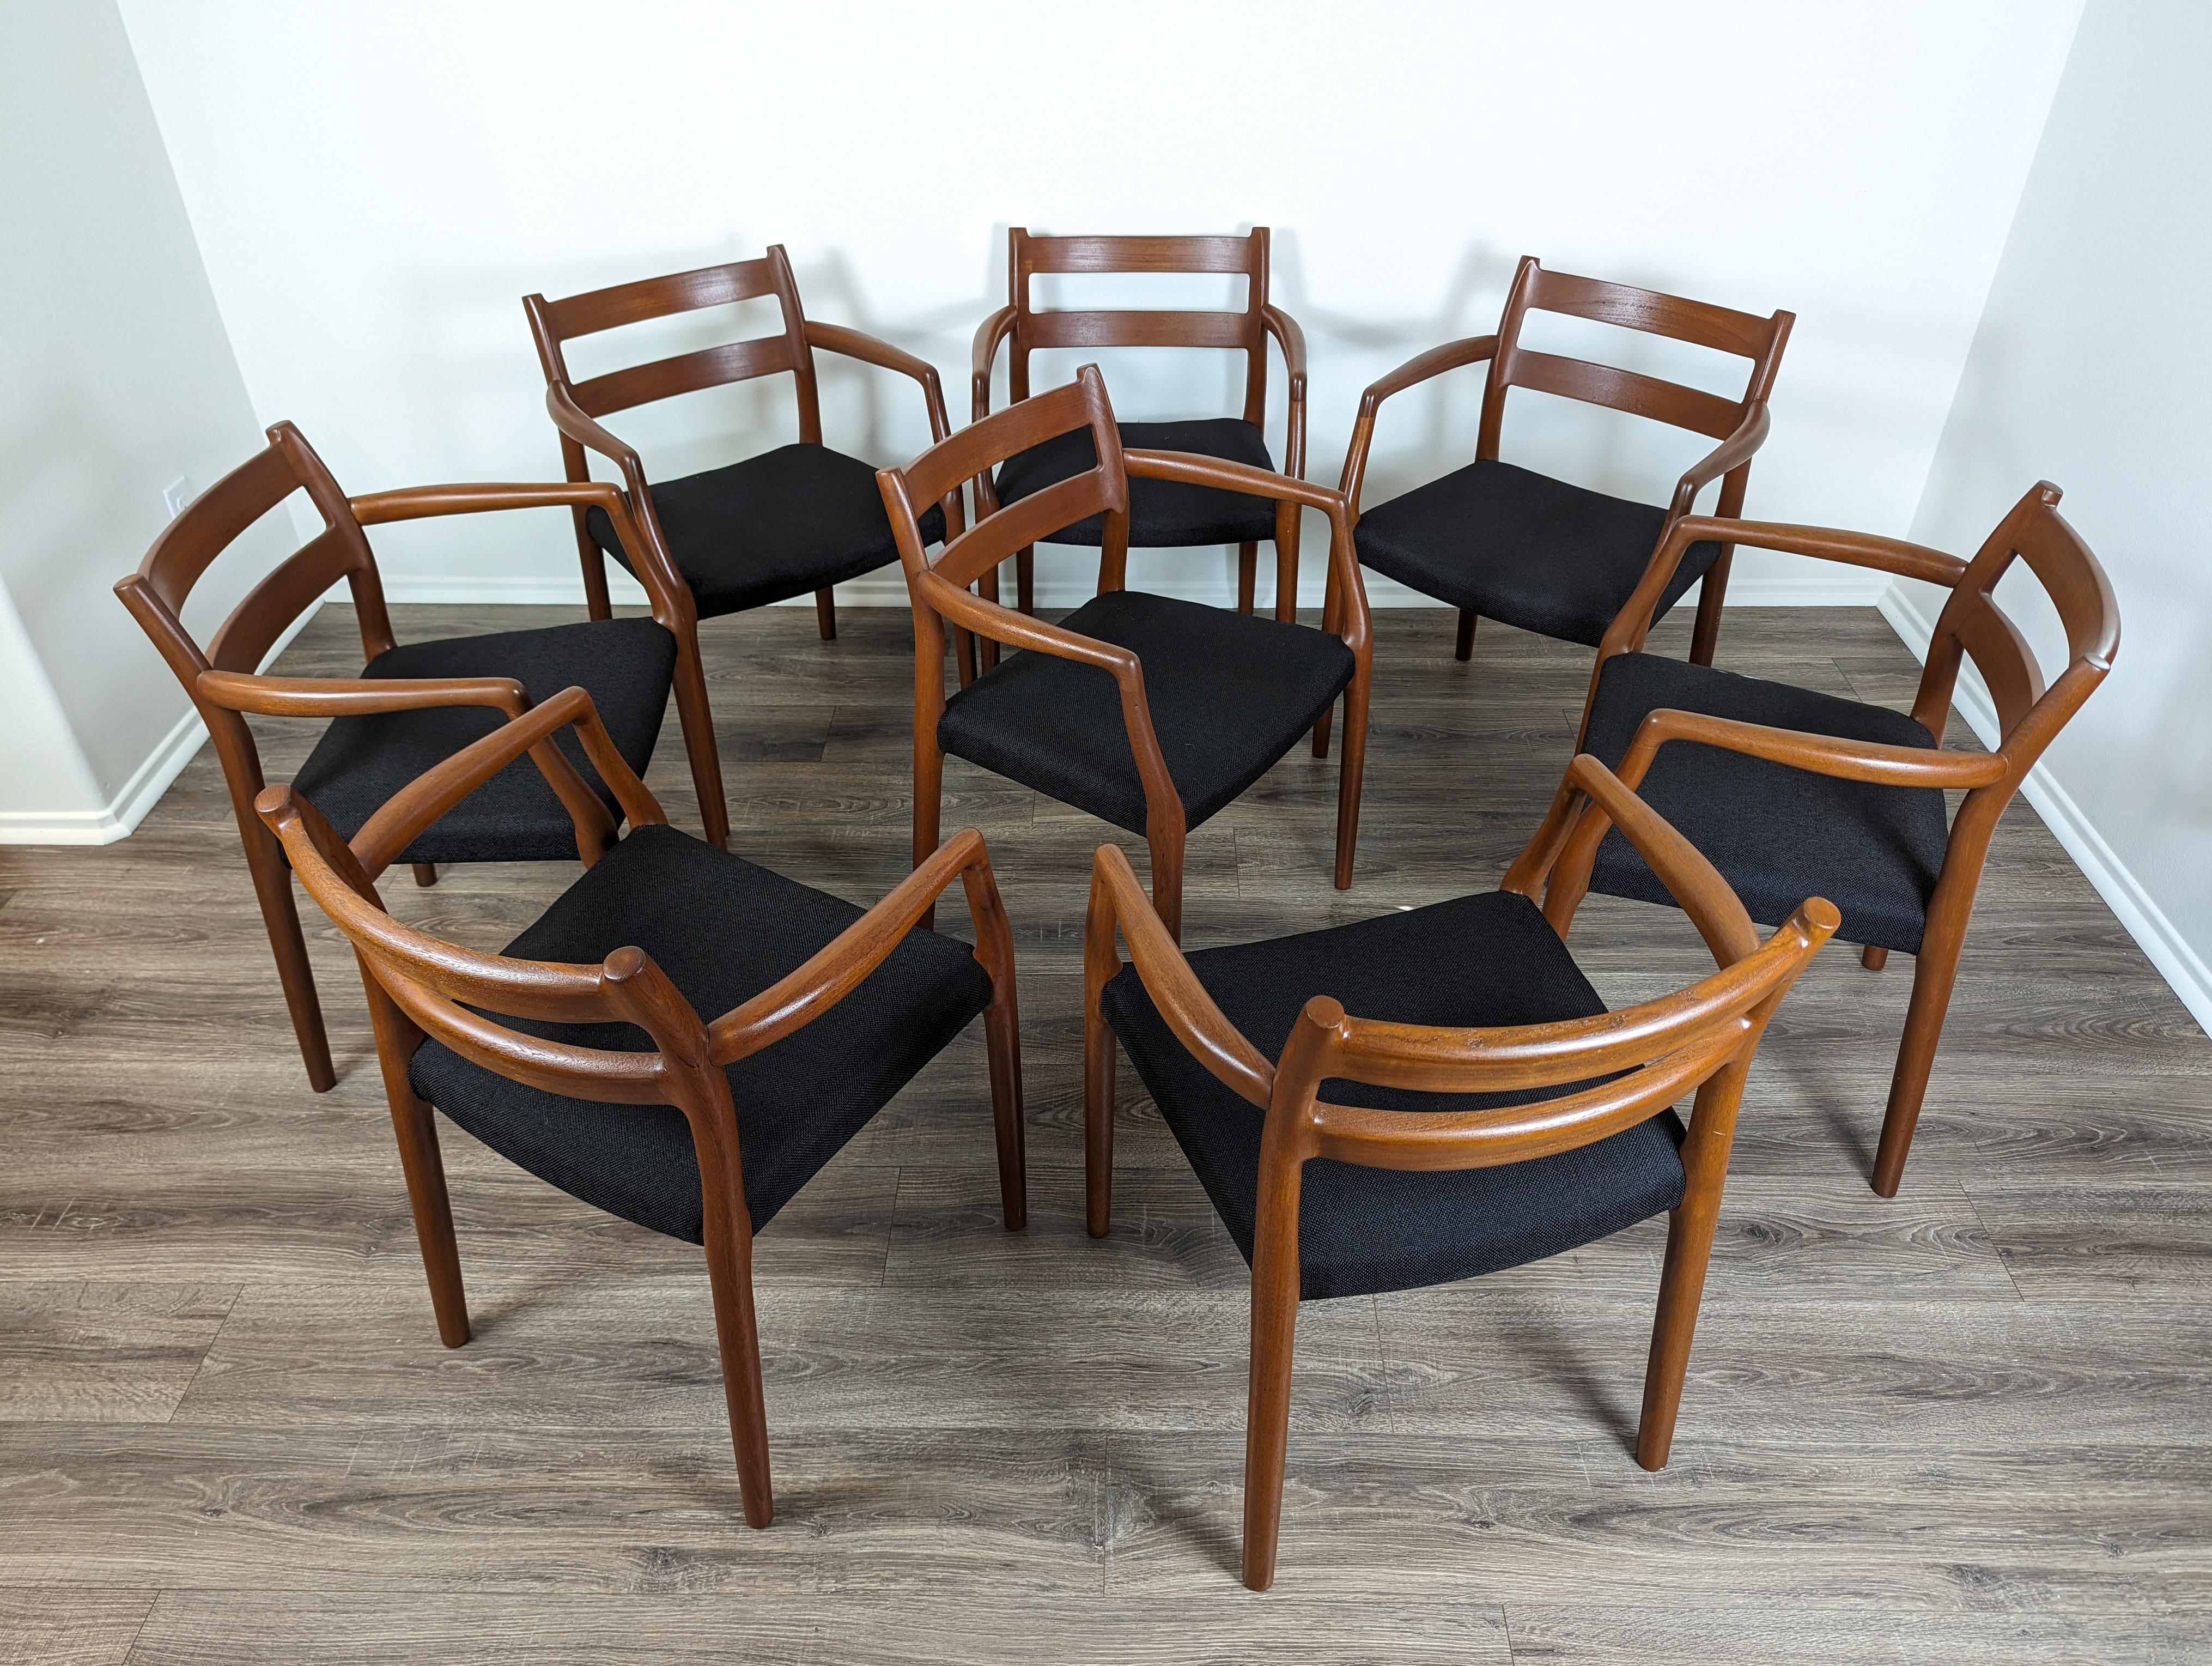 Introducing the epitome of Danish design excellence - the authentic Model 67 Moller Chairs from Denmark. Immerse yourself in the world of mid-century modern sophistication with these meticulously crafted teak wood chairs. Designed by the legendary